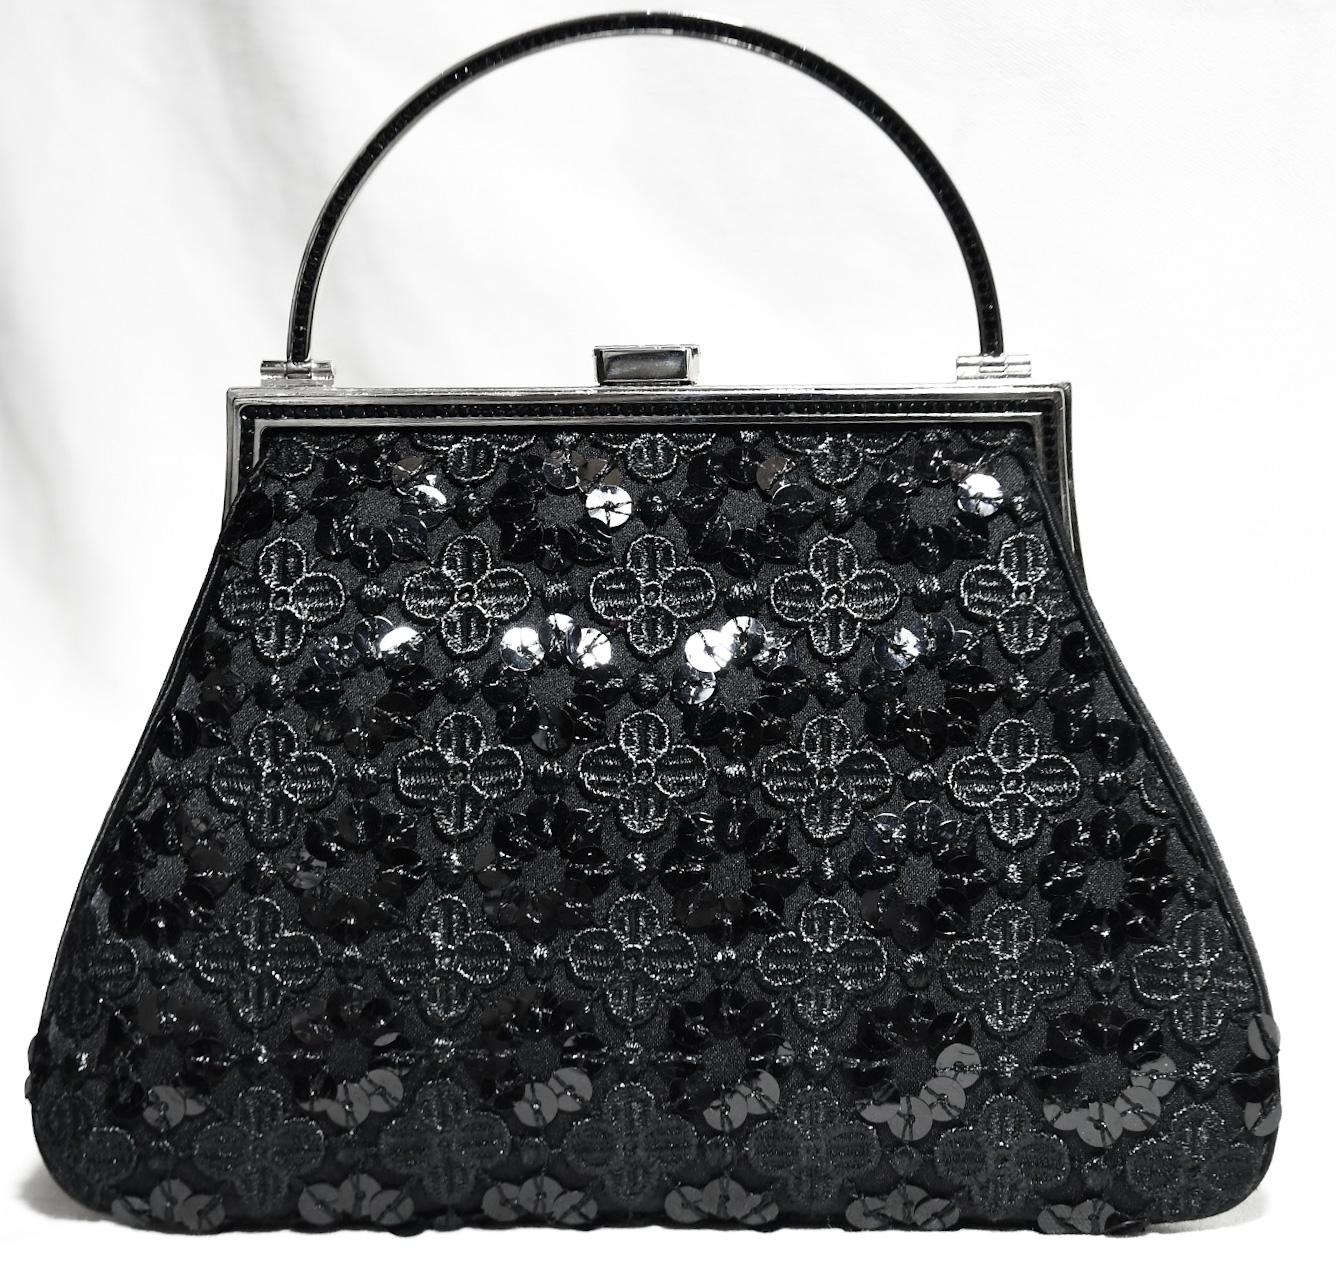 Judith Leiber Black Satin Embroidered & Sequin Evening Bag In Excellent Condition For Sale In Palm Beach, FL